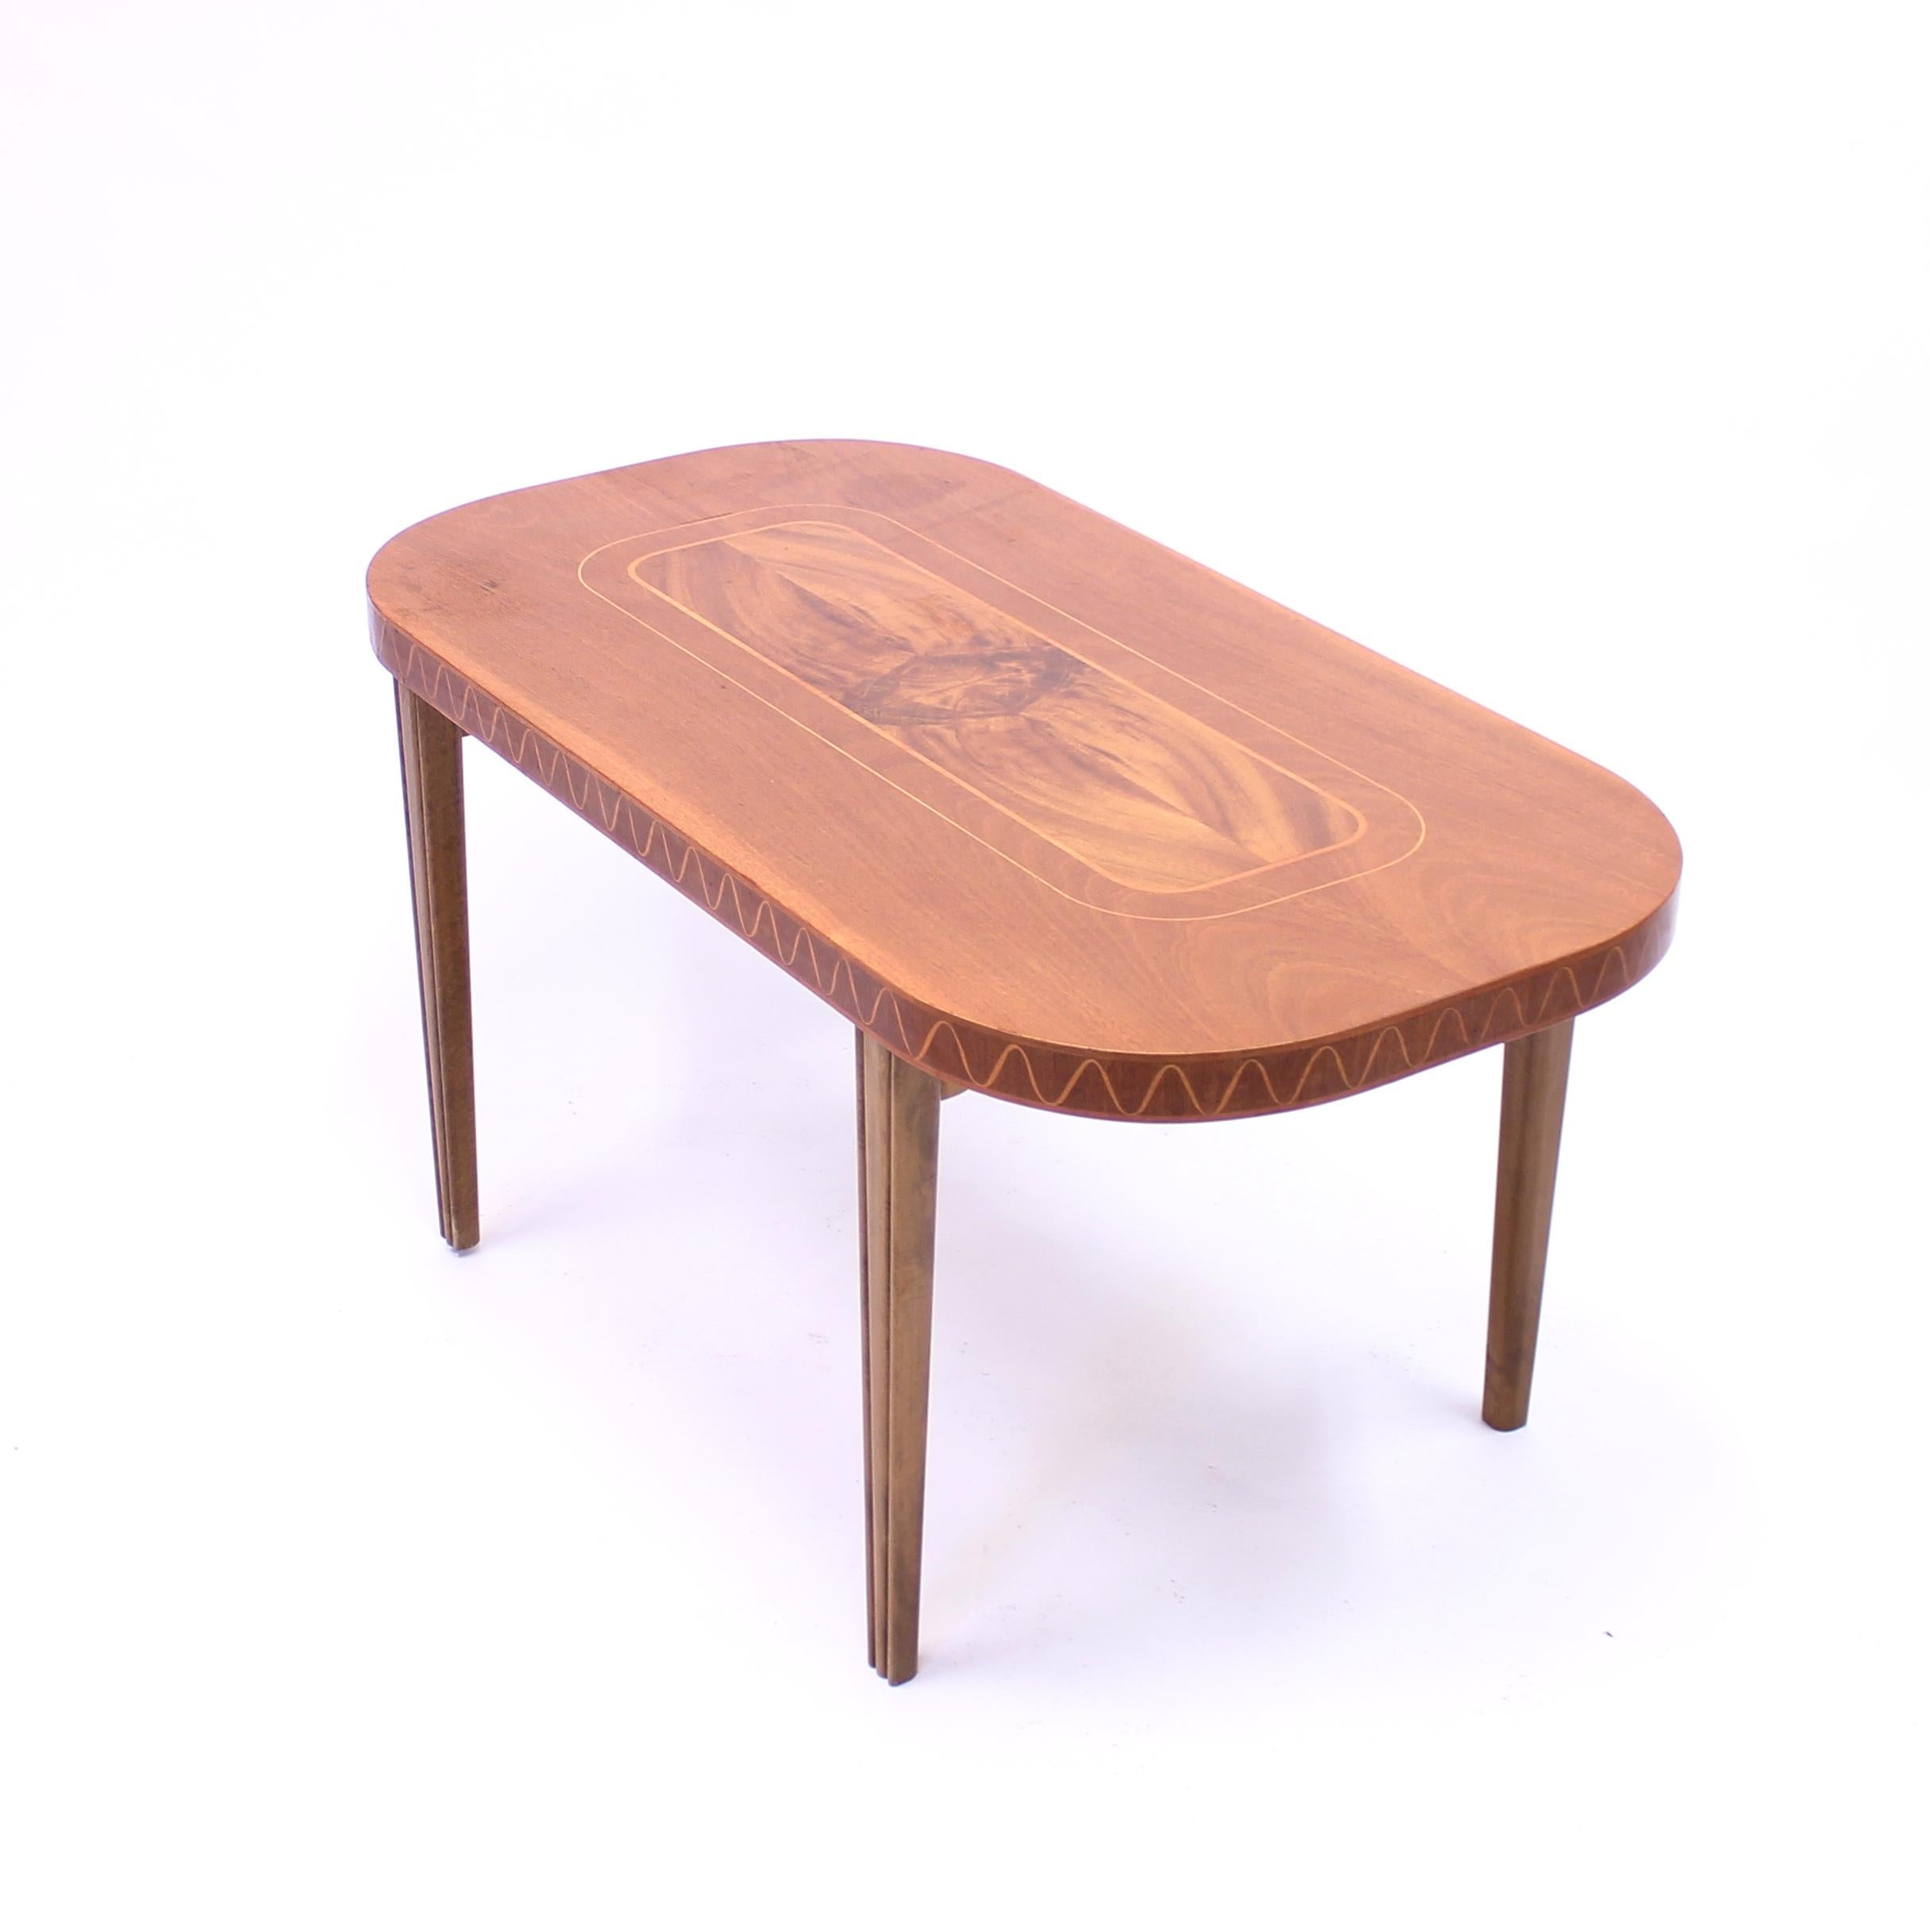 Coffee table from the 1940s in the Swedish Modern style with inlay of multiple wood types, including mahogany, birch and maple. Inlay of wave motif on the side of the table top. Good vintage condition with normal ware consistent with age and use